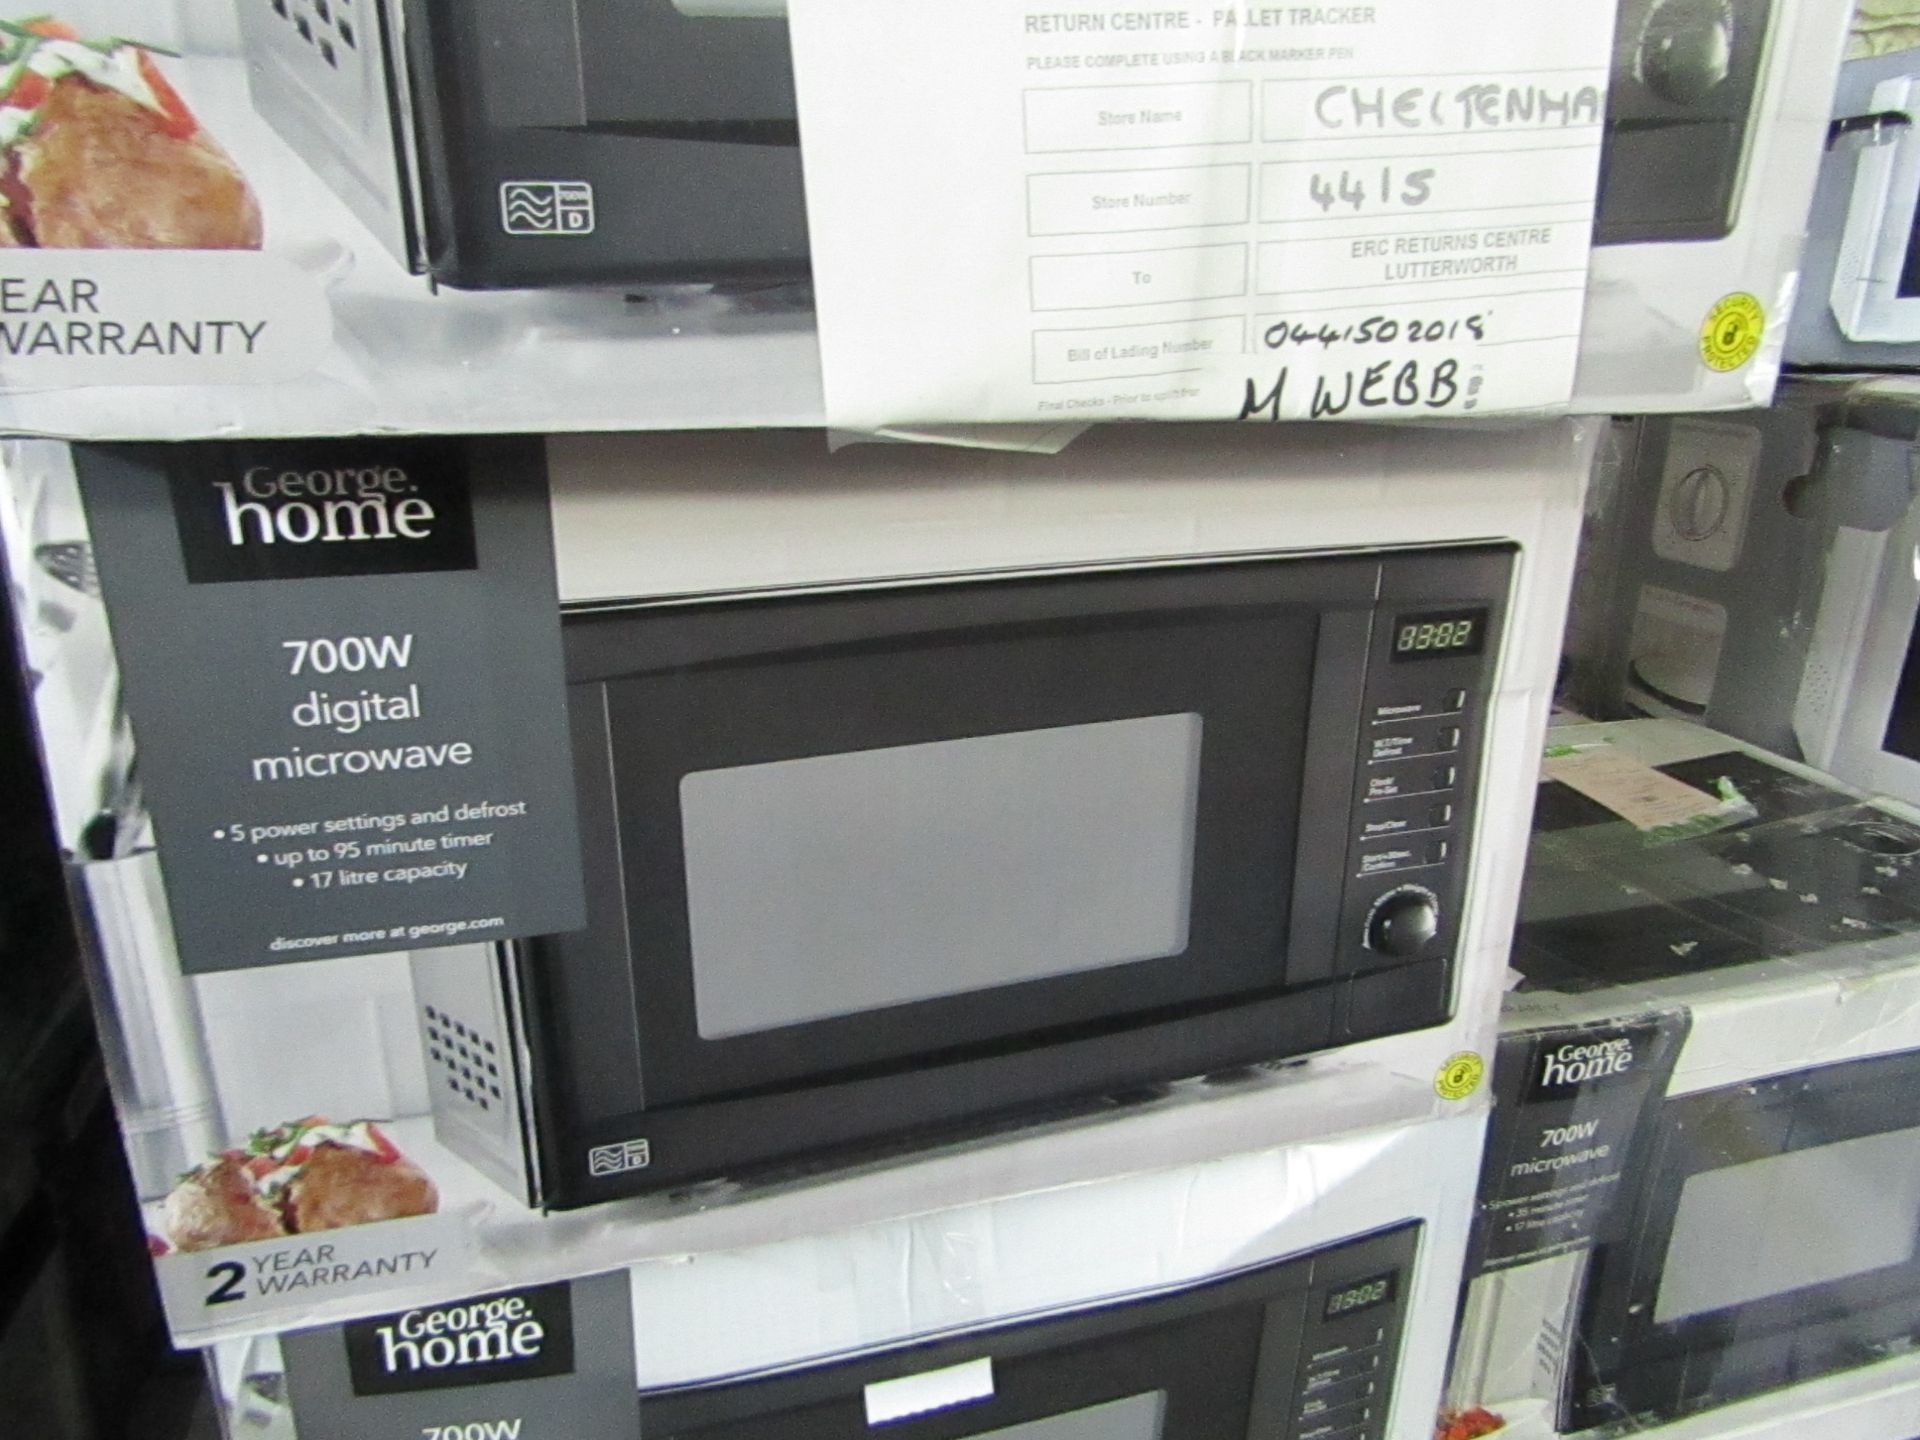 5x 700w Digital Microwave Oven - Black - Unchecked & Boxed - RRP £46 - Total lot RRP £230 - Load ref